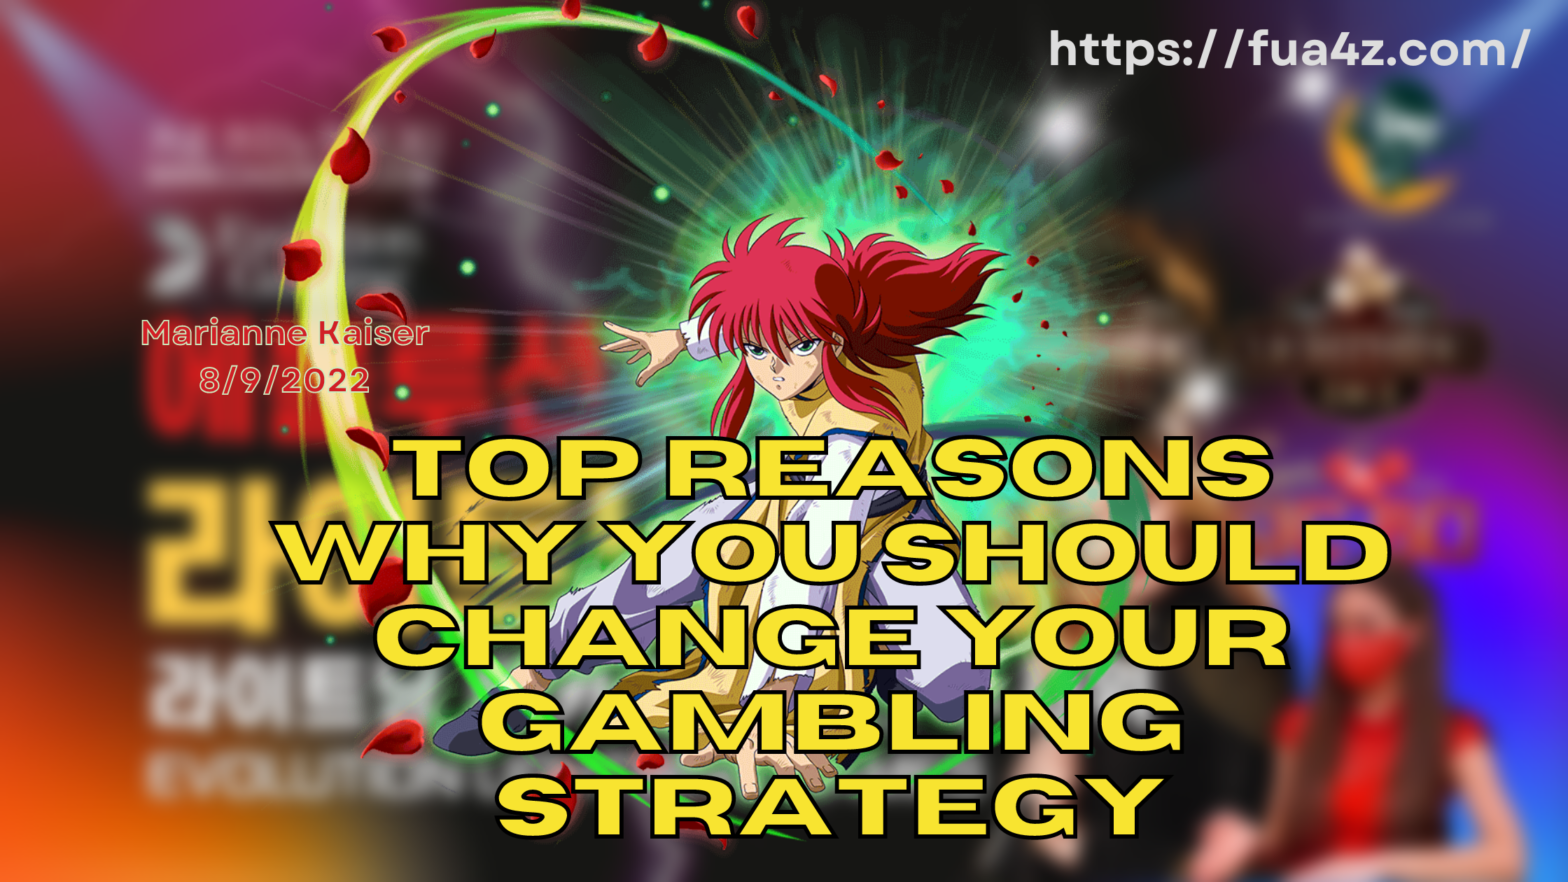 Top Reasons Why You Should Change Your Gambling Strategy